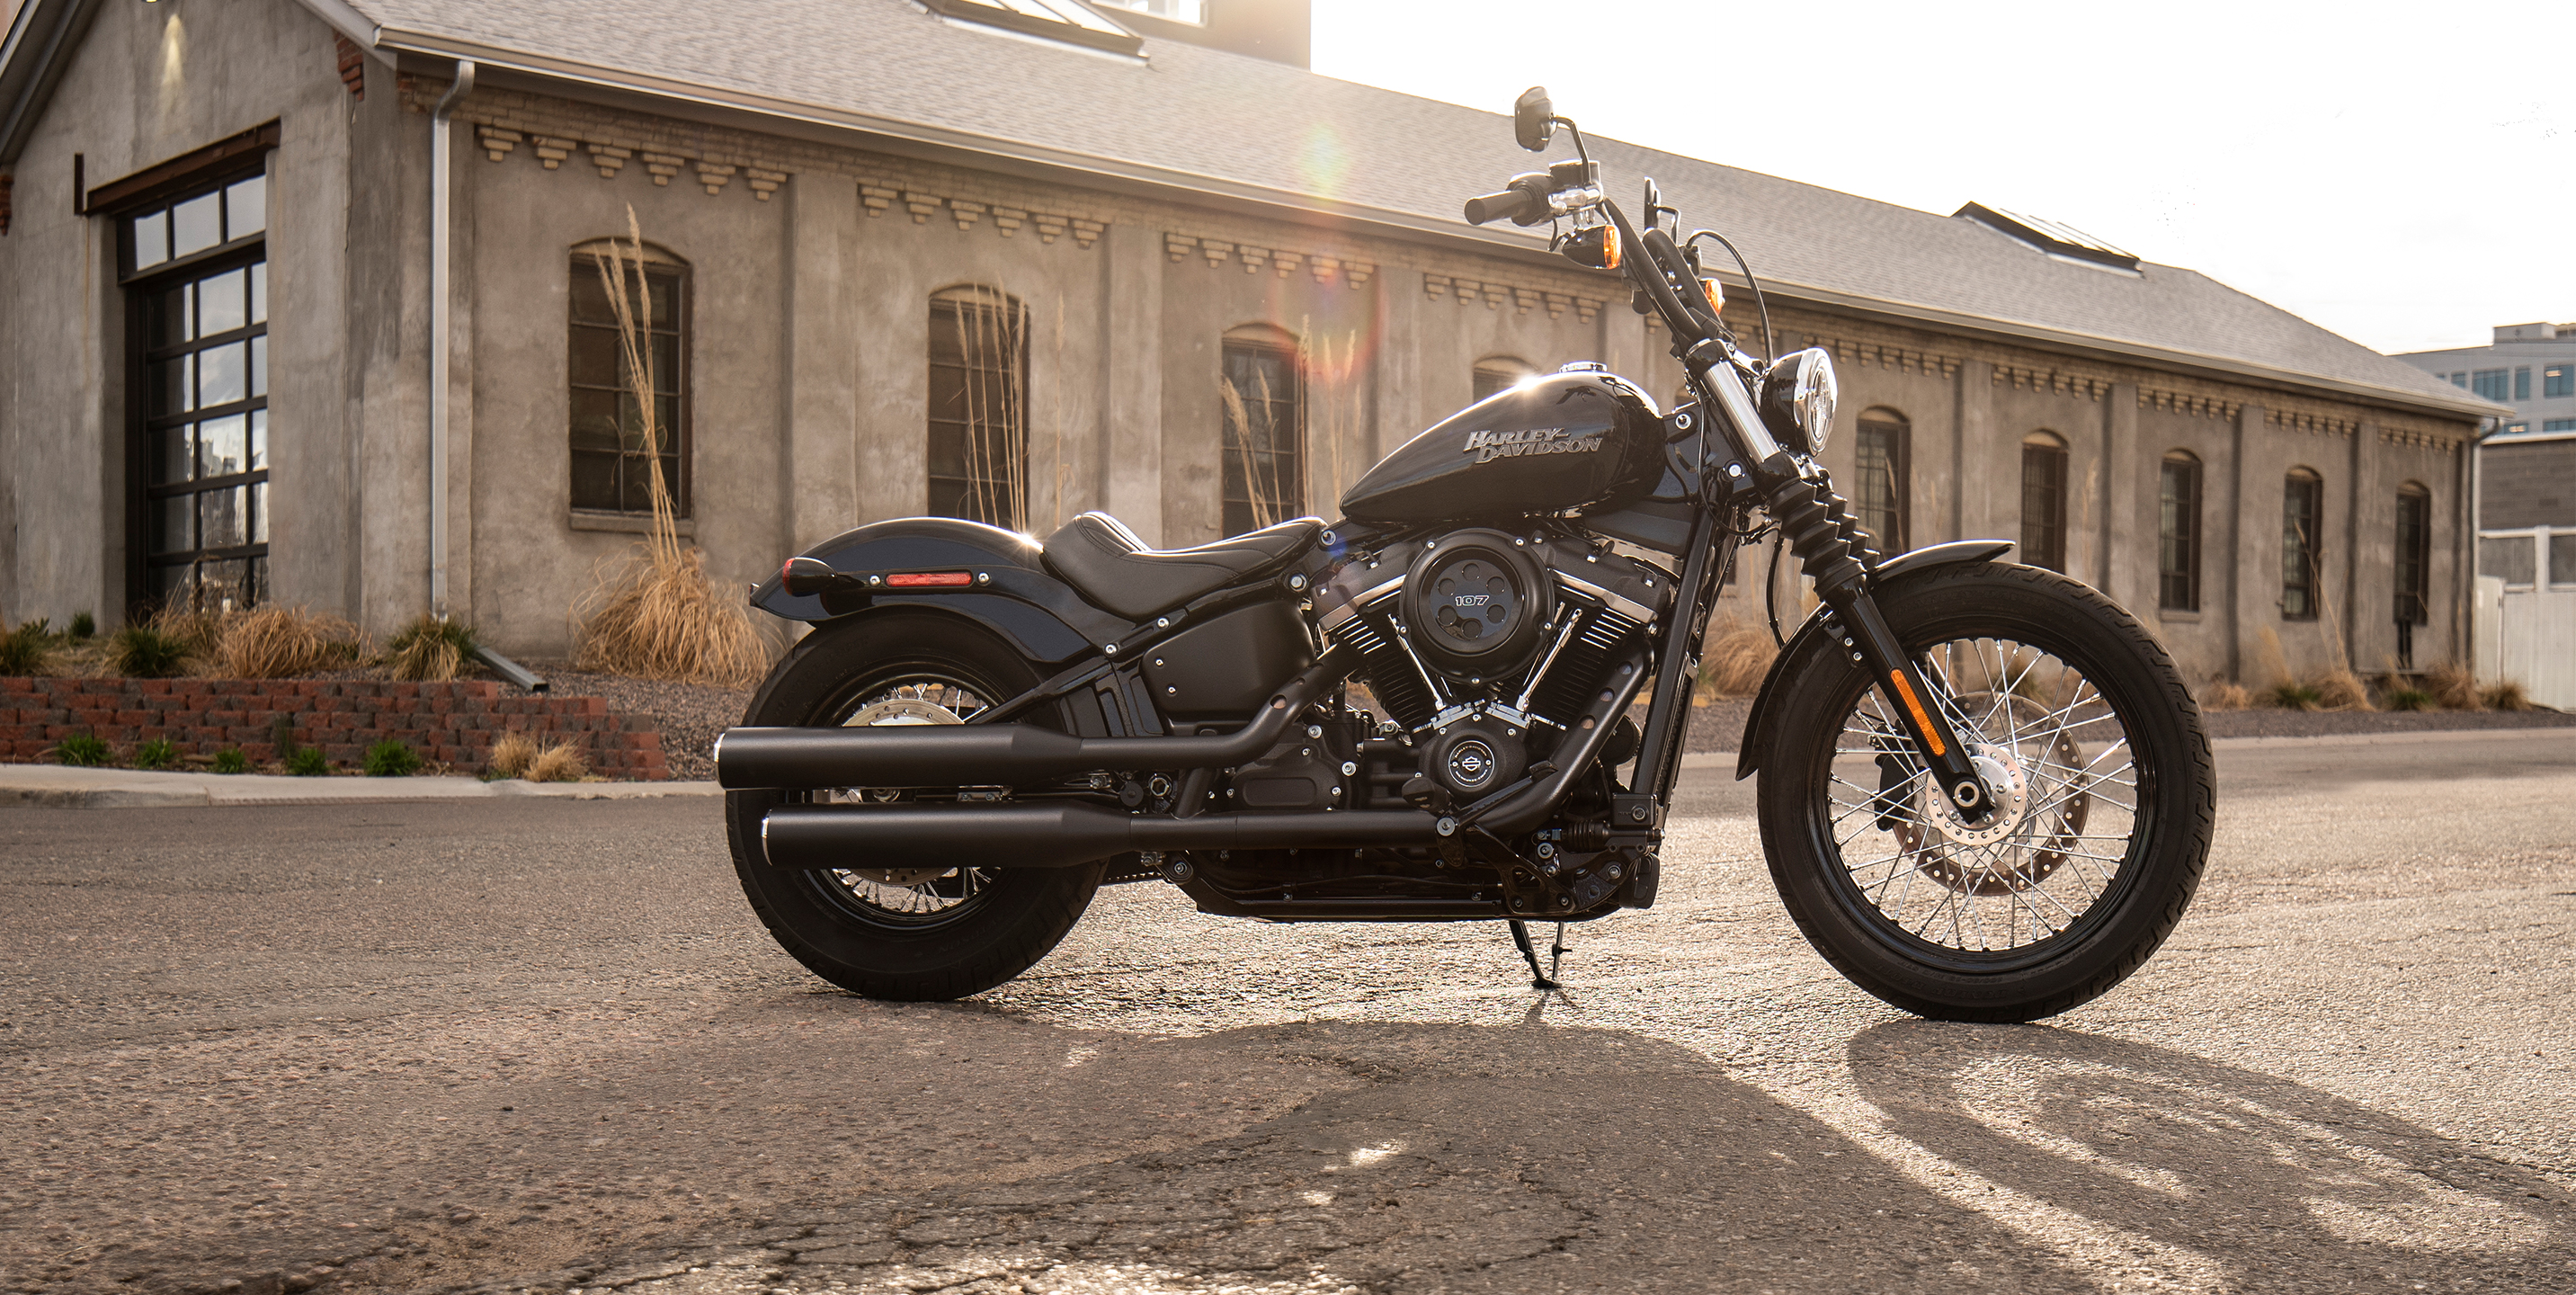  2019  Harley  Davidson  Street Bob Pictures Specs and 